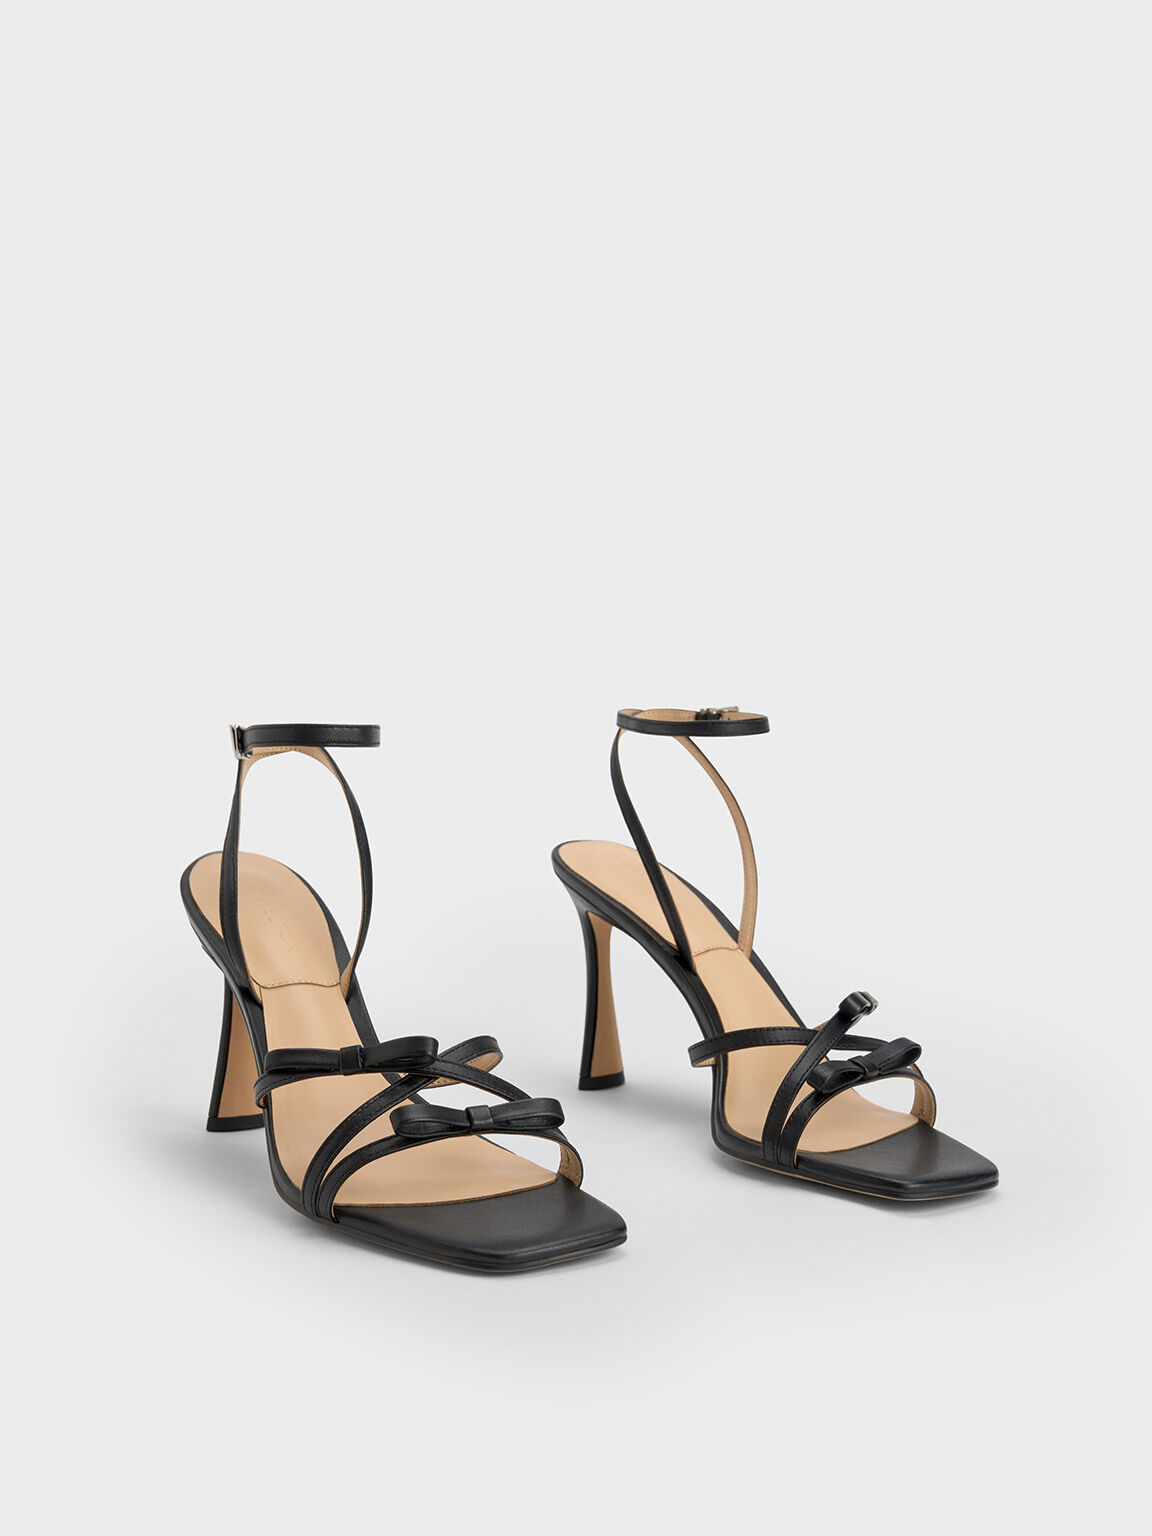 Leather Bow Strappy Sandals, Black, hi-res